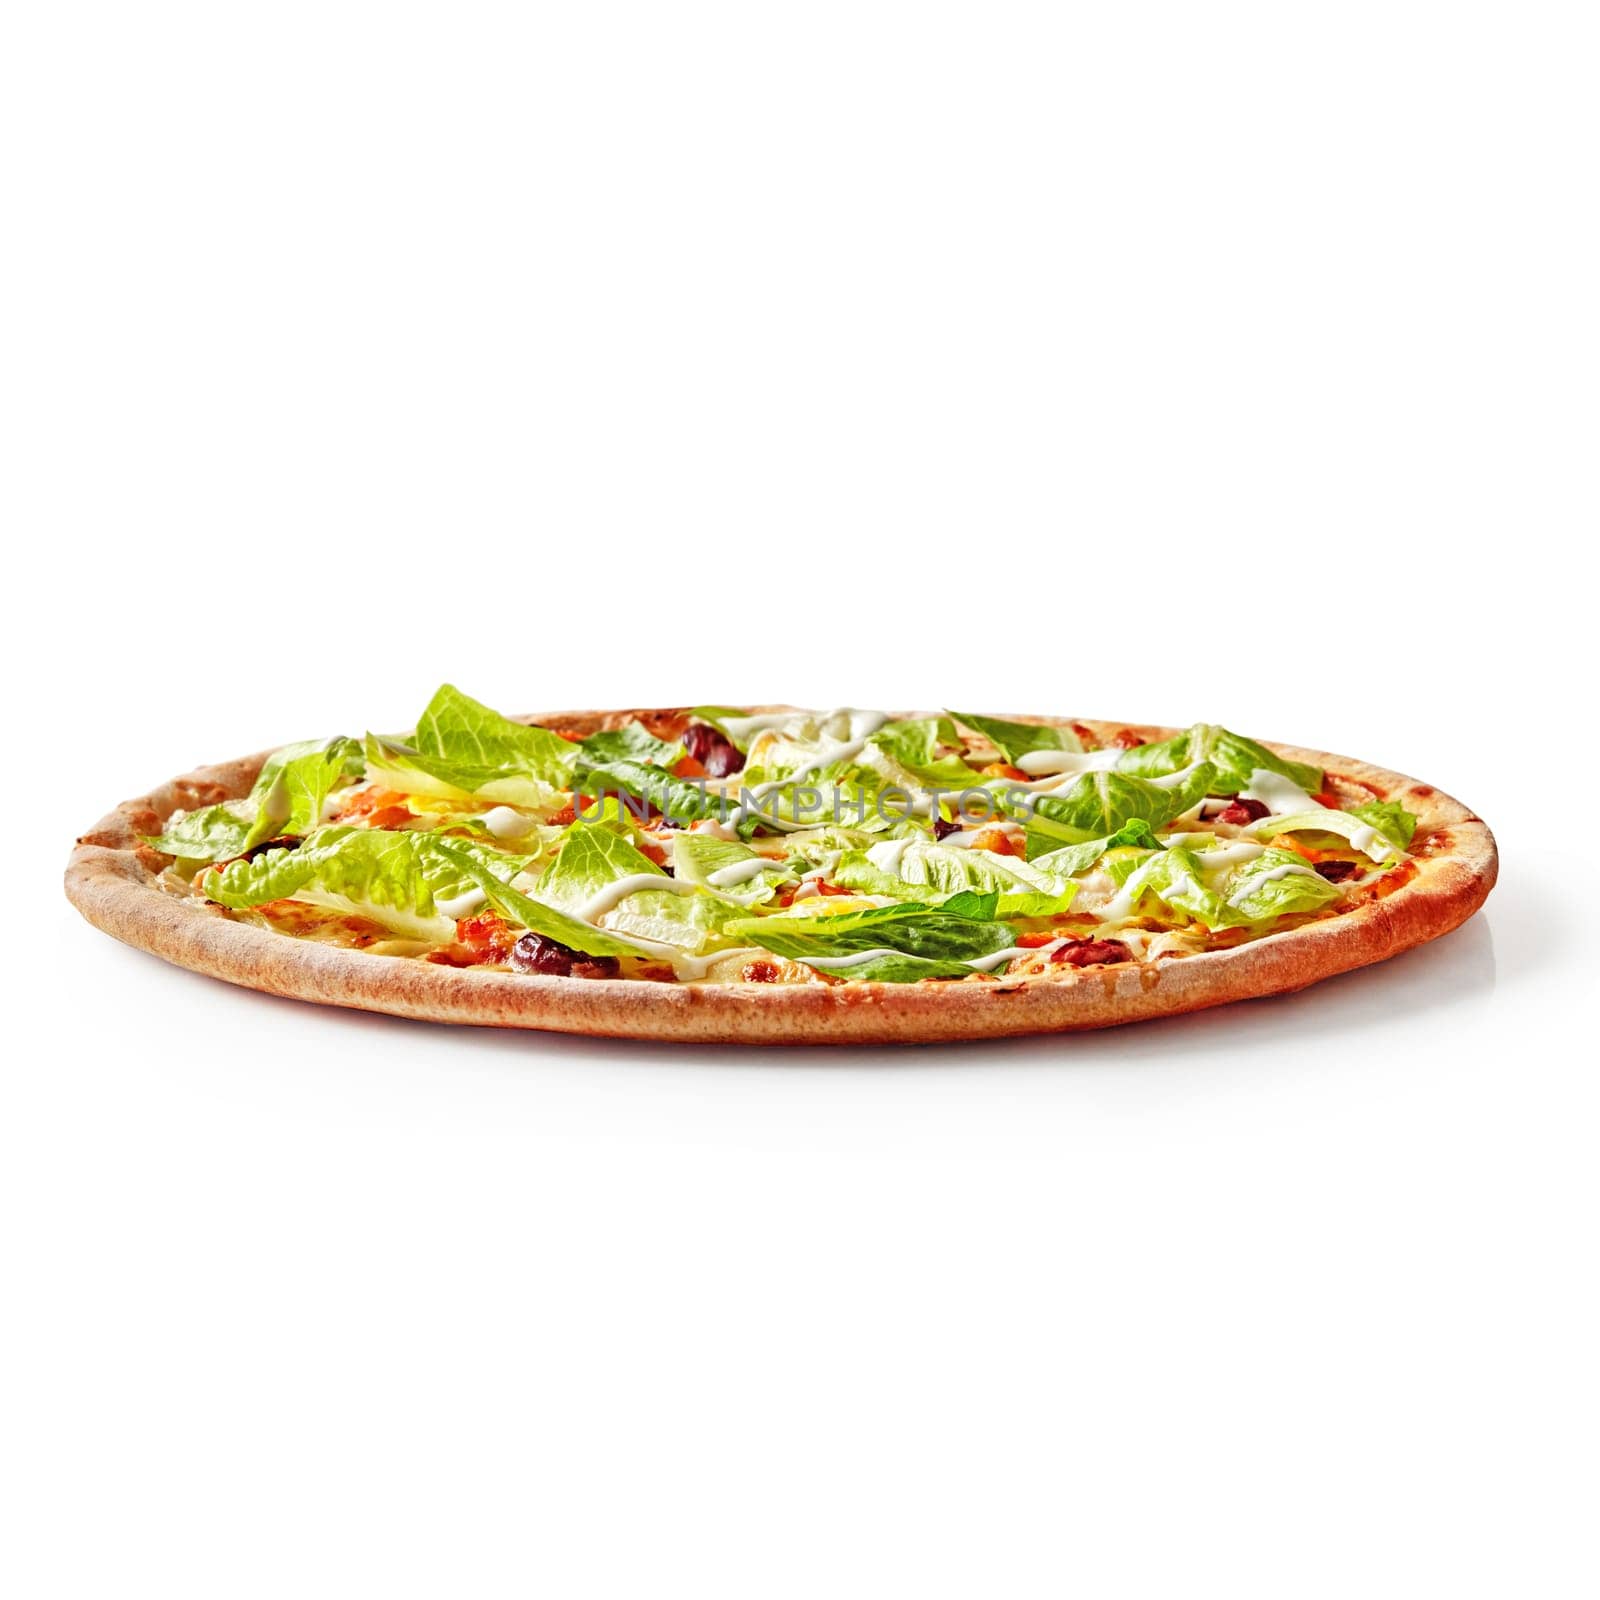 Delicious thin pizza with browned crispy edge with chicken fillet, tomatoes, red beans topped with fresh Romaine lettuce and cream cheese sauce, isolated on white background. Italian style cuisine